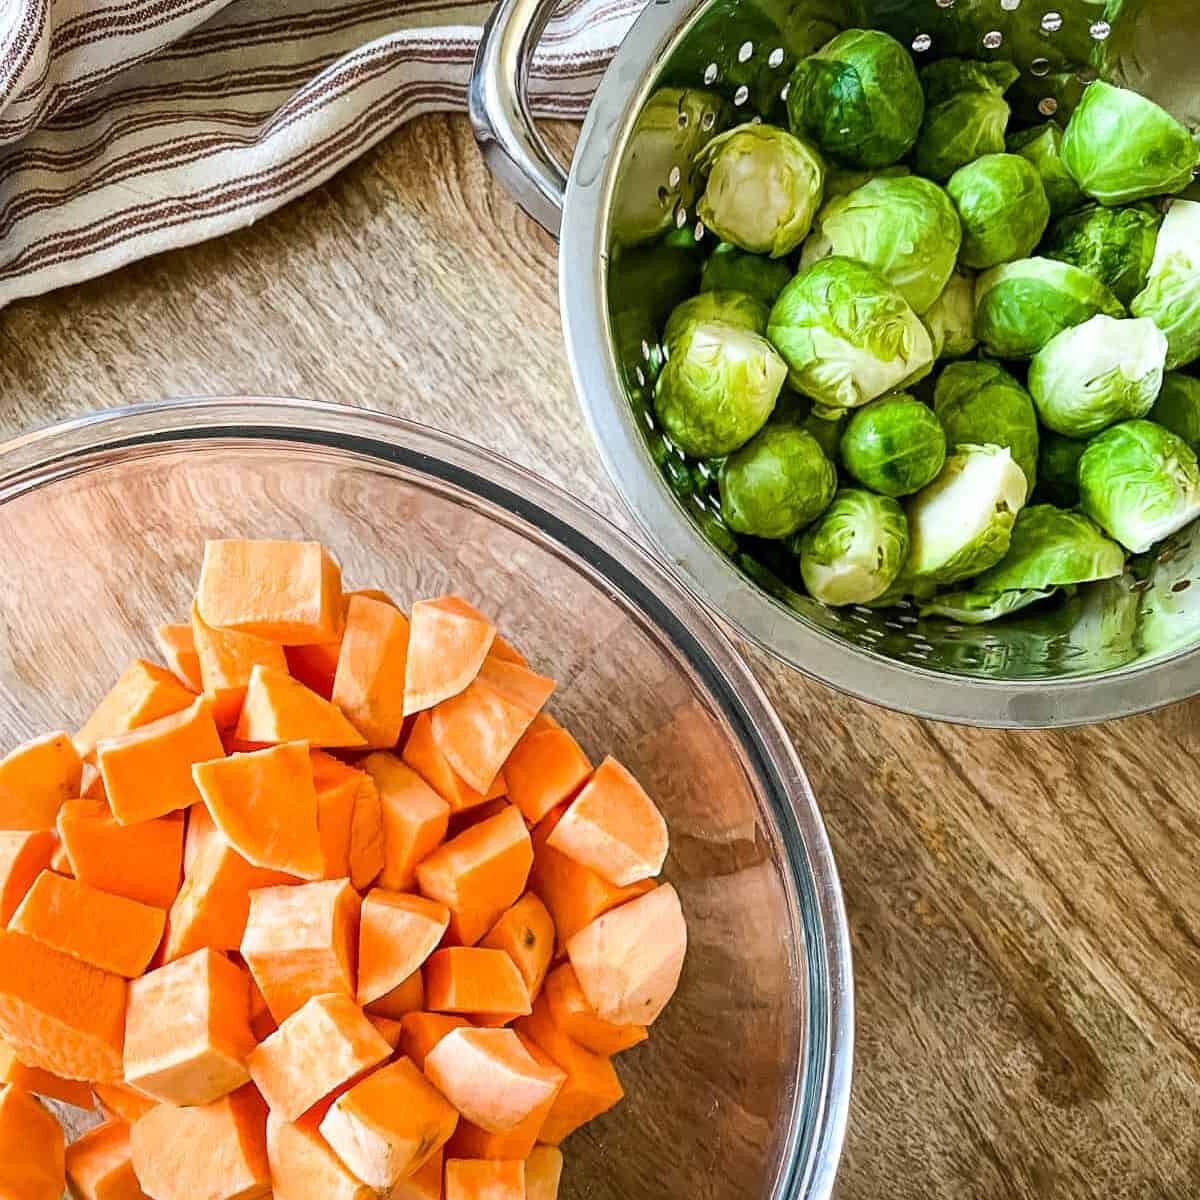 One glass bowl filled with cubed sweet potatoes and a colander with freshly washed brussels sprouts